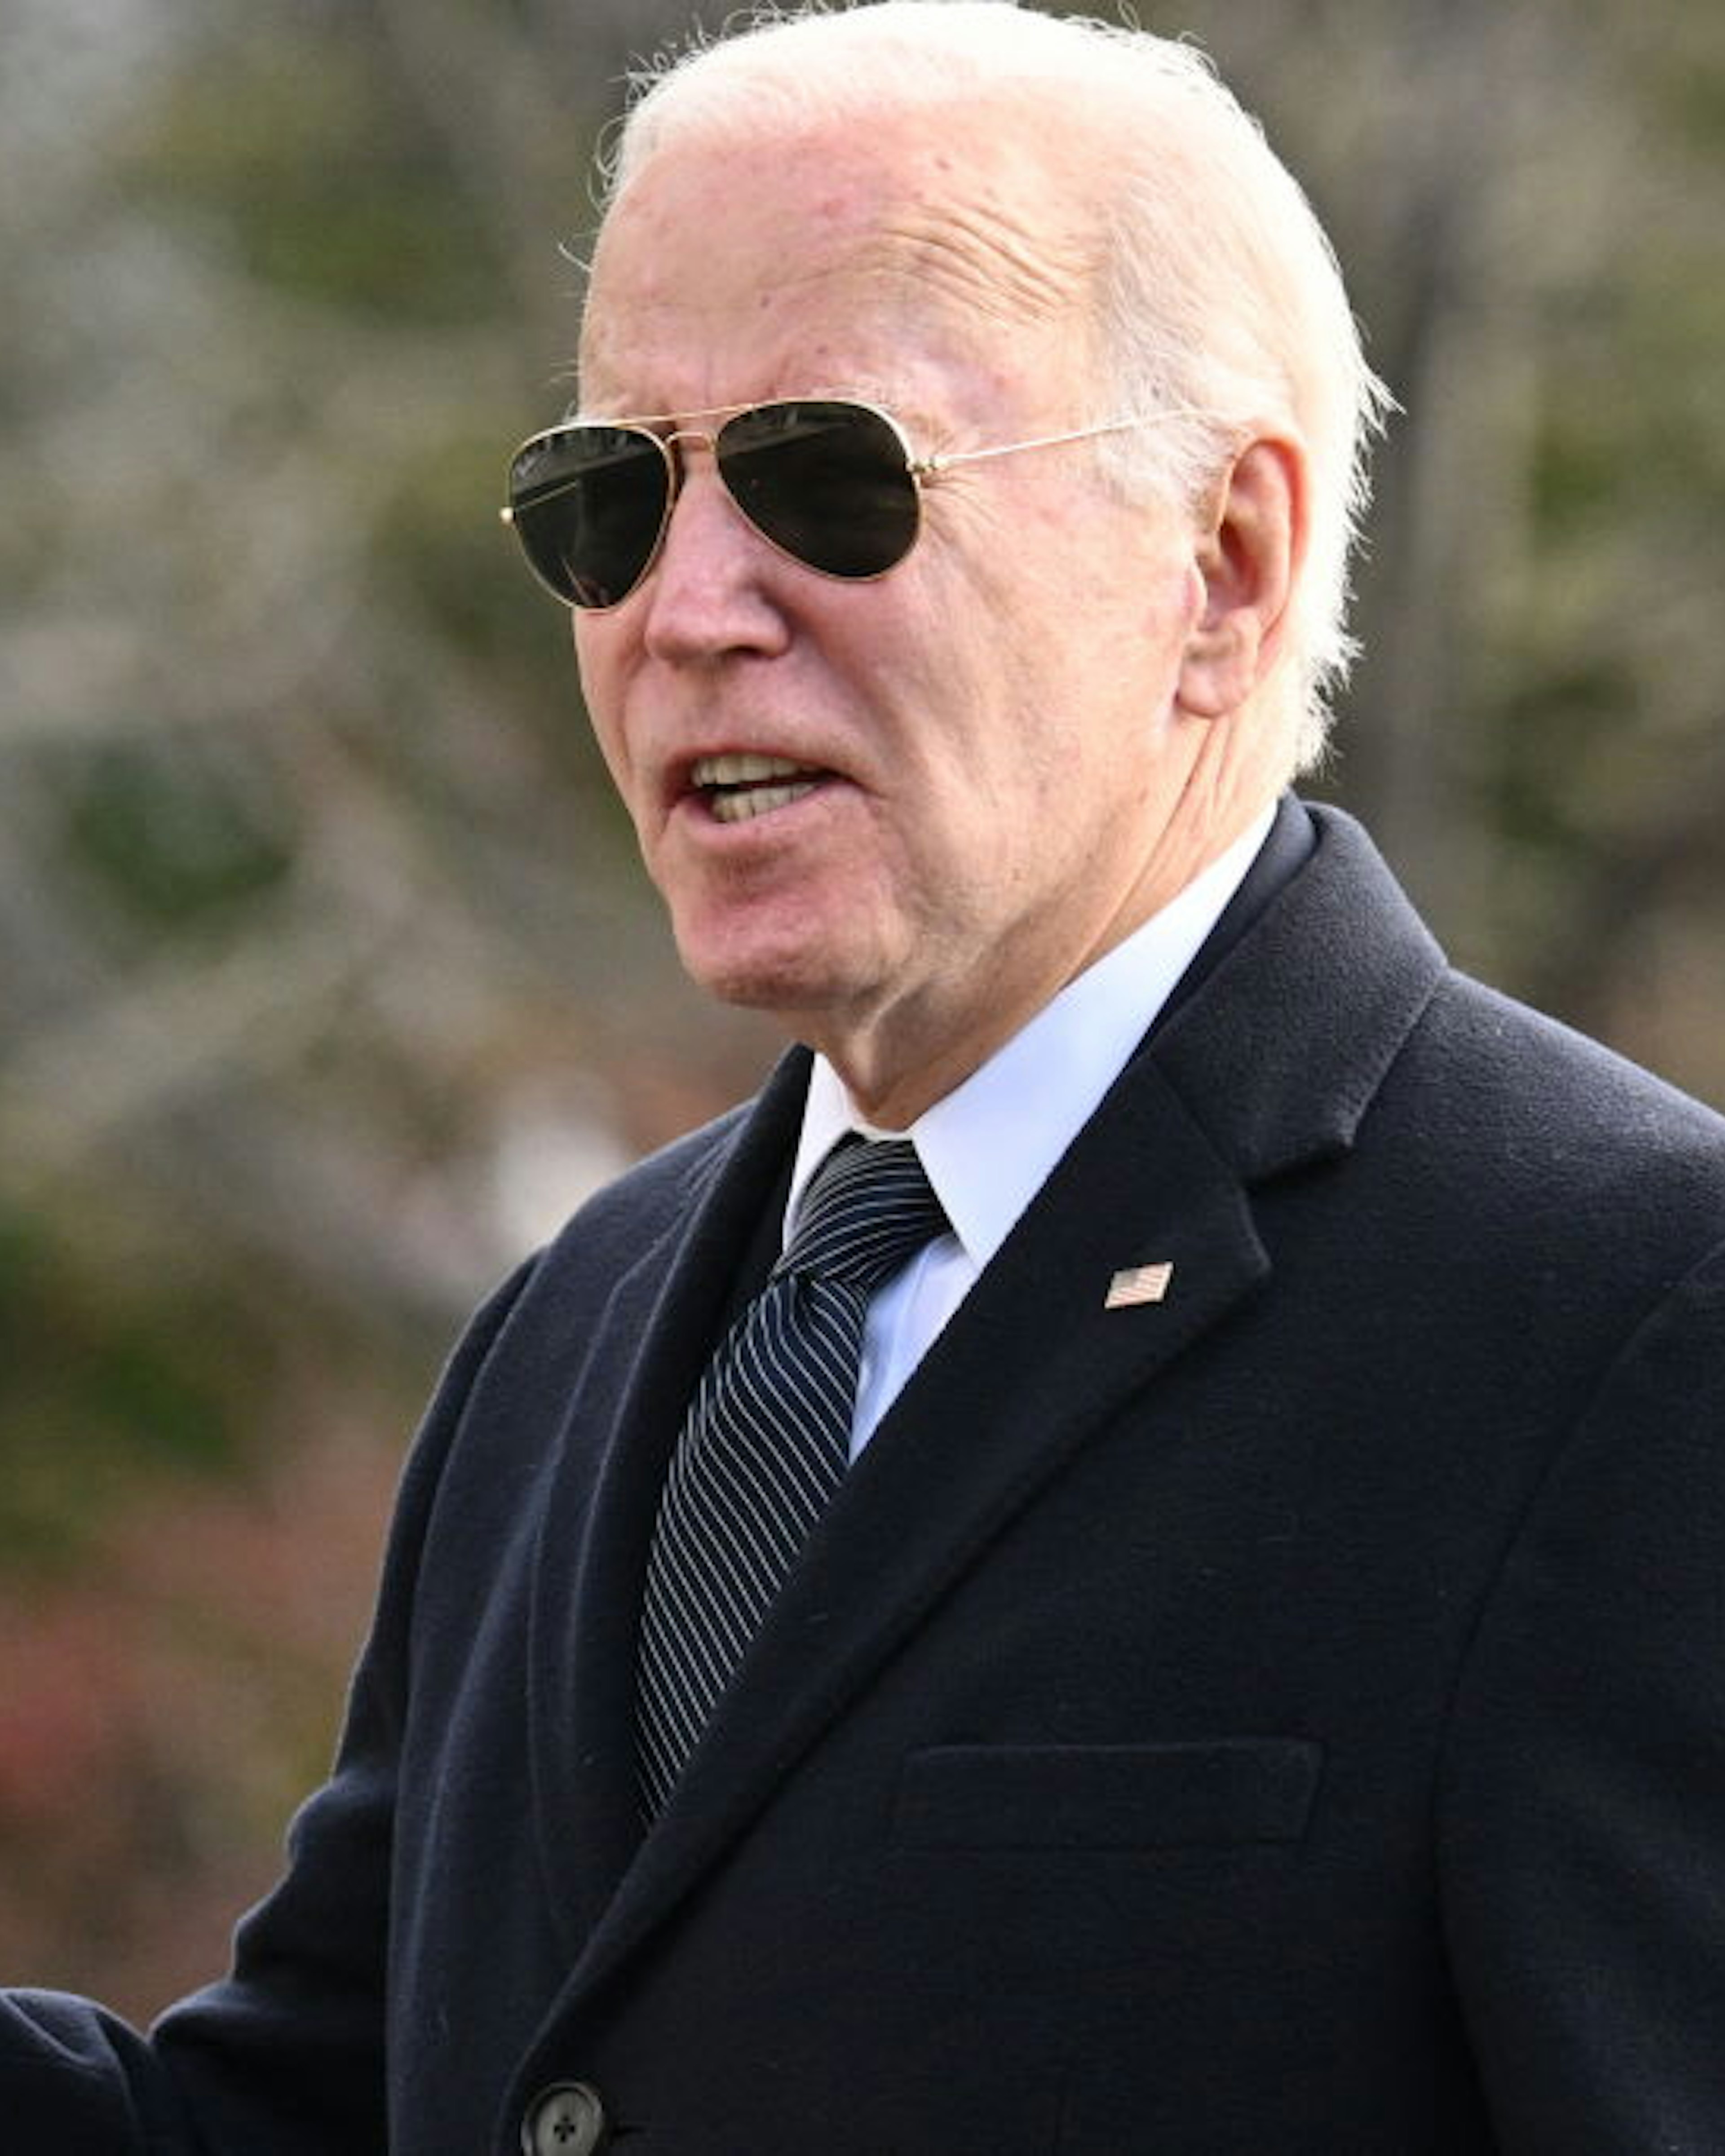 US President Joe Biden arrives at White House in Washington, DC, on December 19, 2023, as he returns from Wilmington, Delaware. (Photo by Mandel NGAN / AFP) (Photo by MANDEL NGAN/AFP via Getty Images)